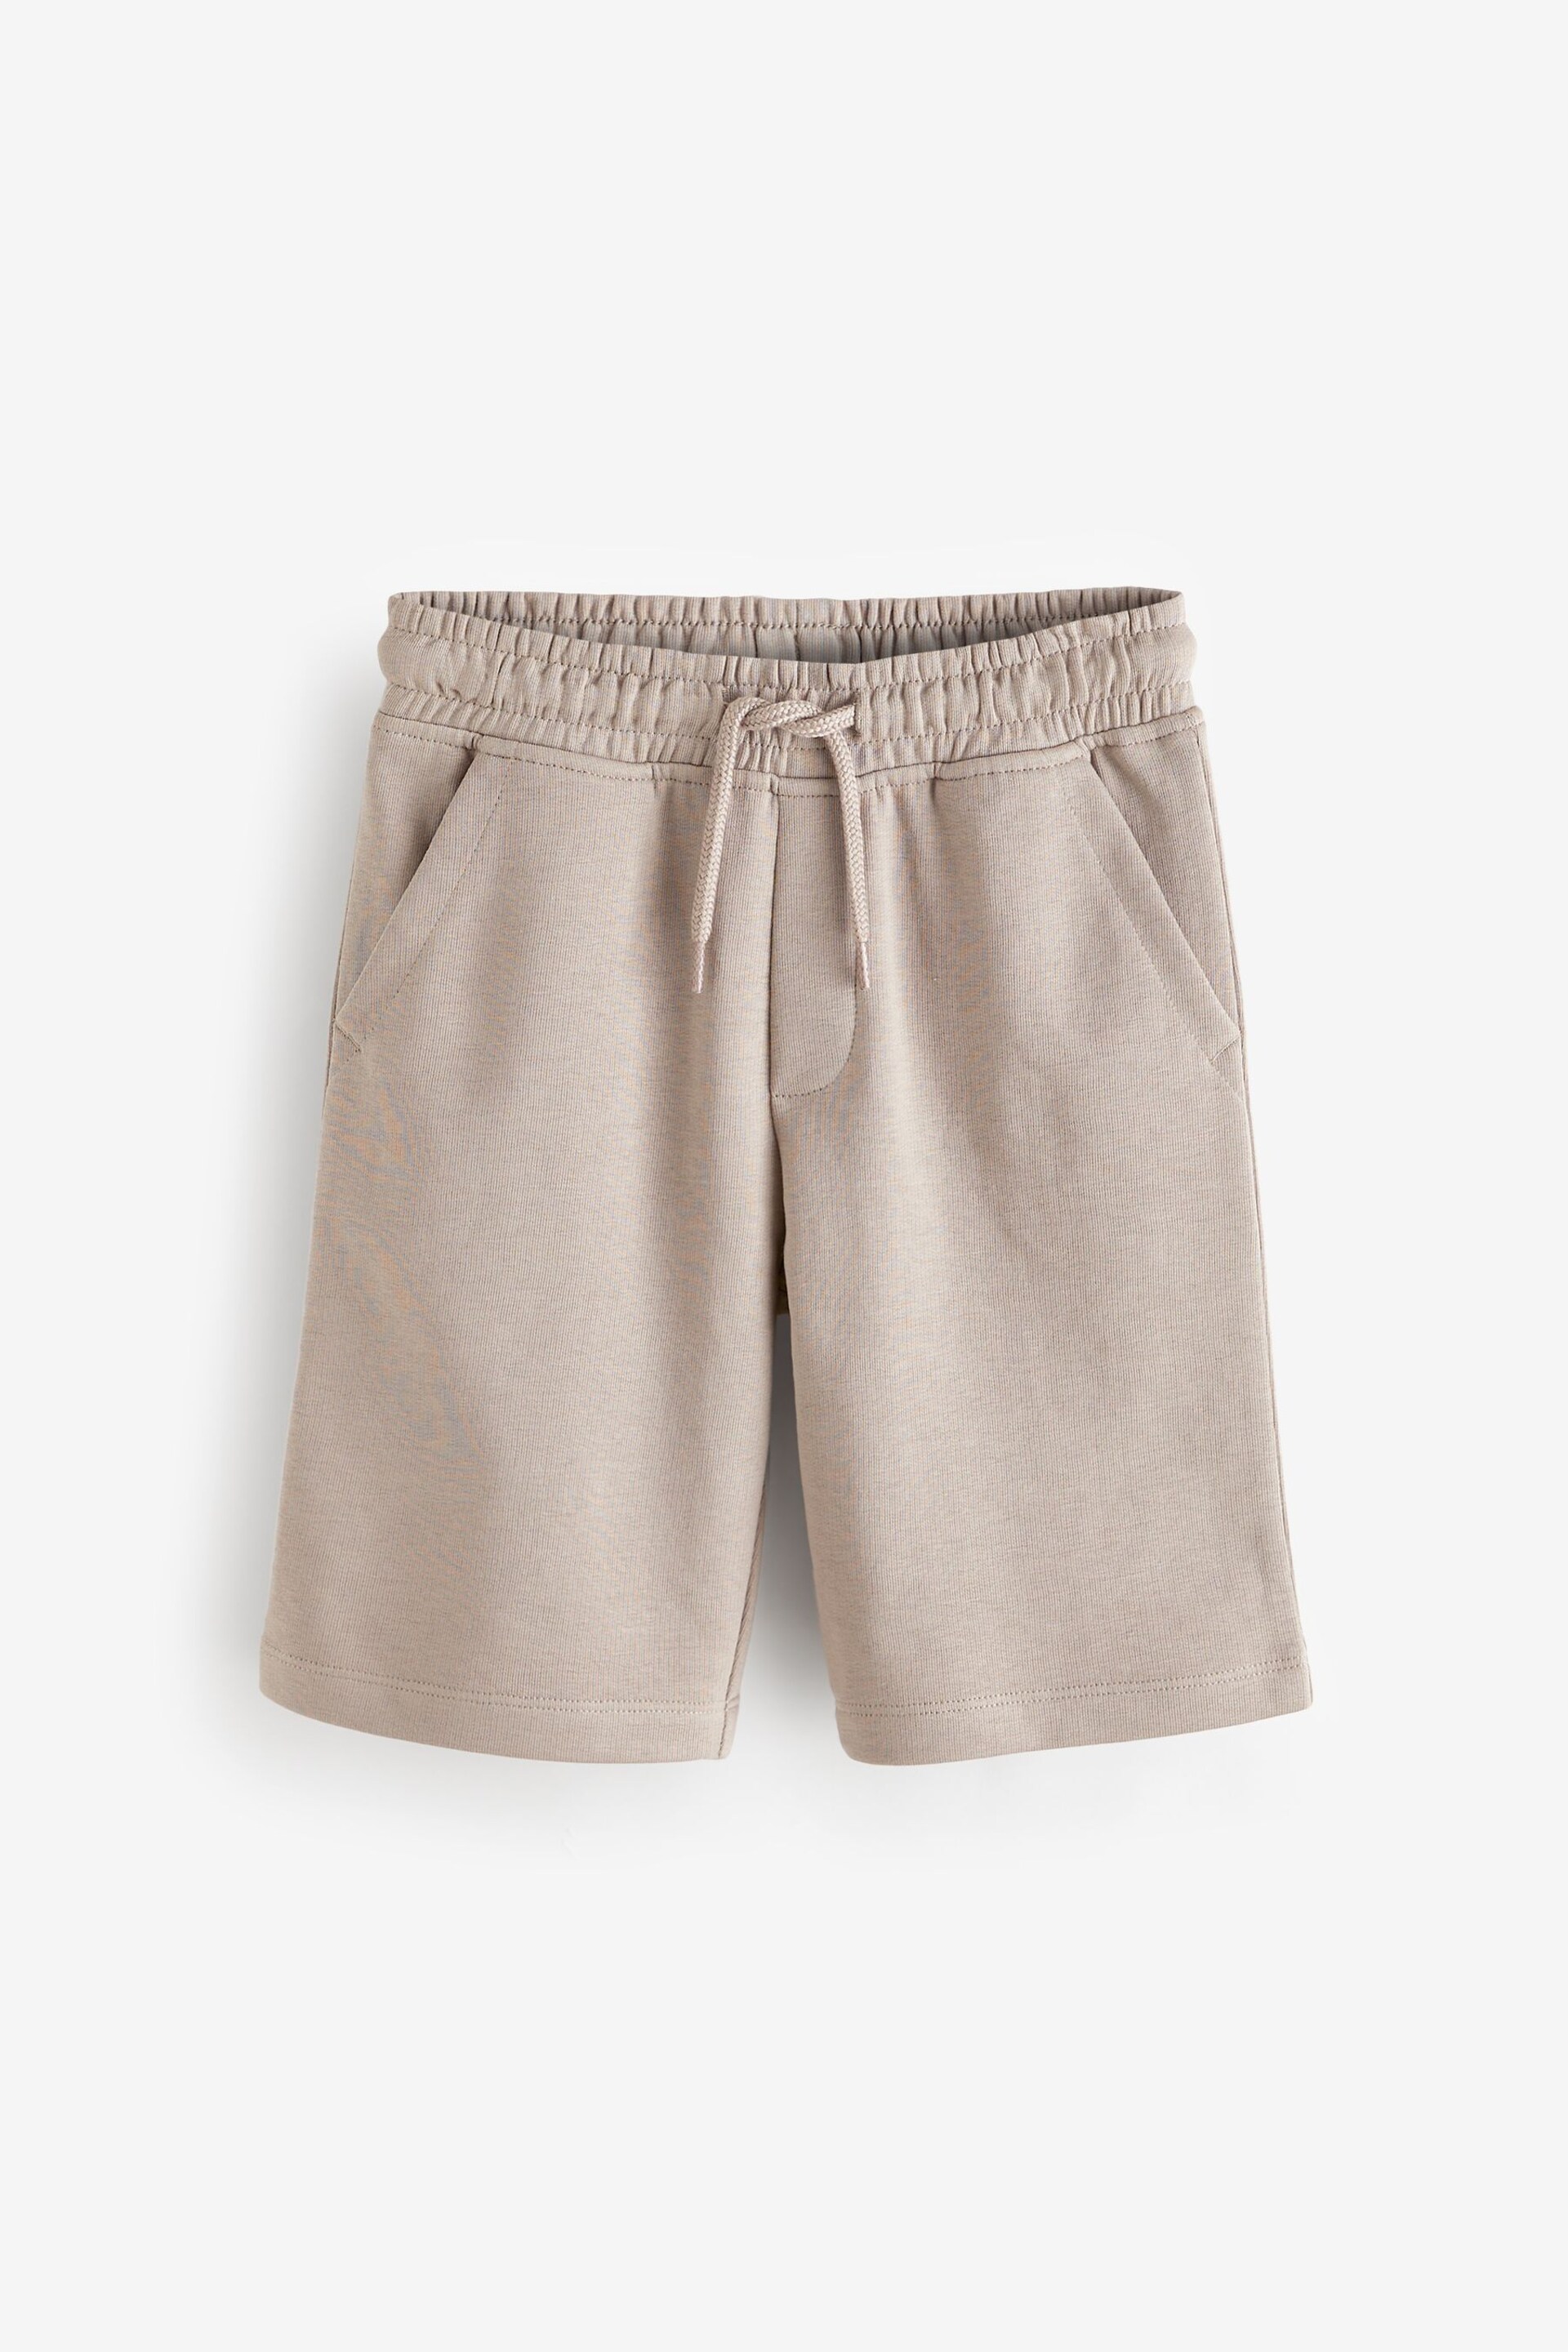 Grey Cement 1 Pack Basic Jersey Shorts (3-16yrs) - Image 1 of 3